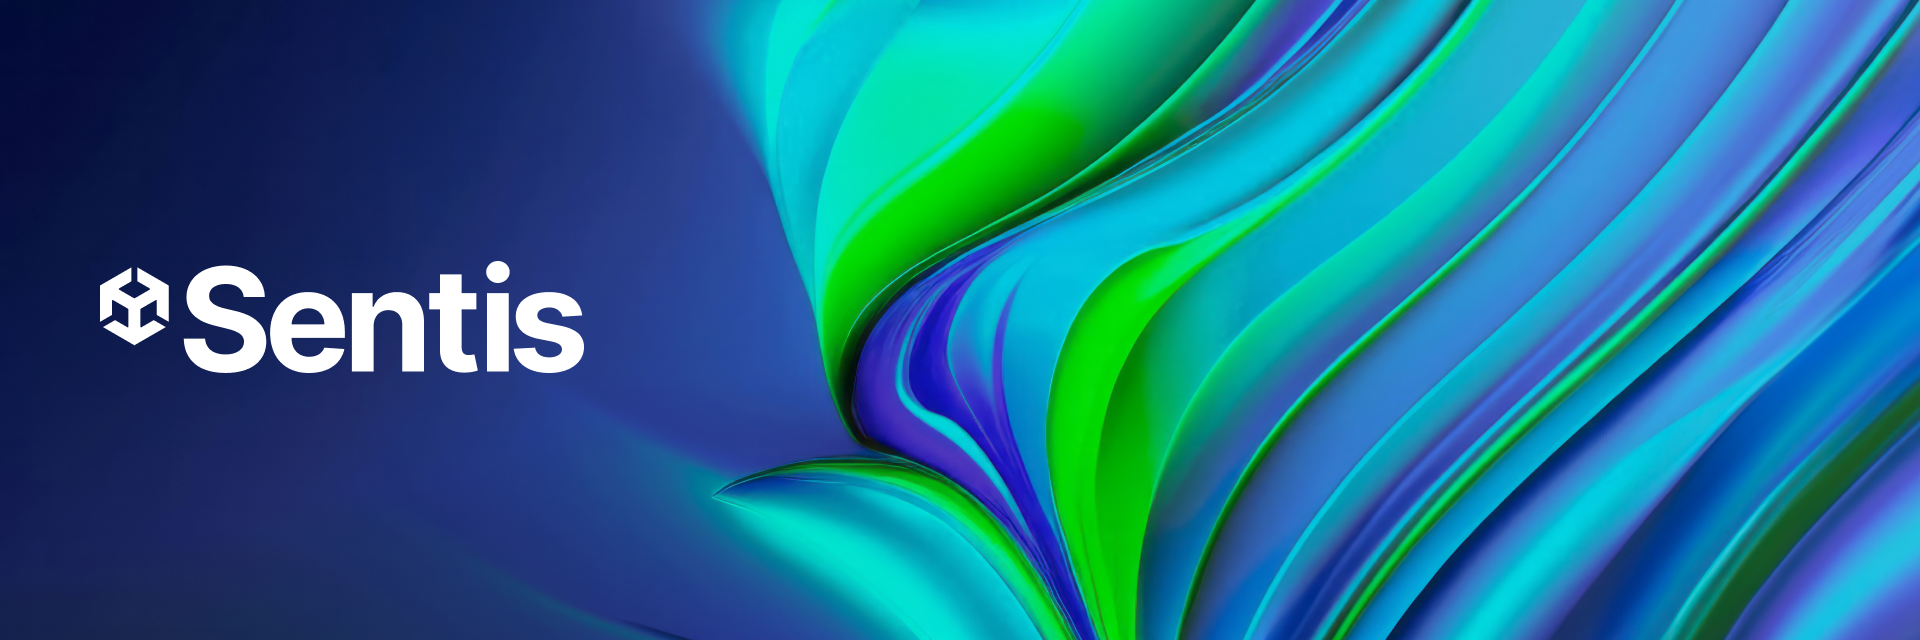 Representative image for Unity Sentis, showing a blue, green, and purple swirl that appears silky and is fading to black along the left side